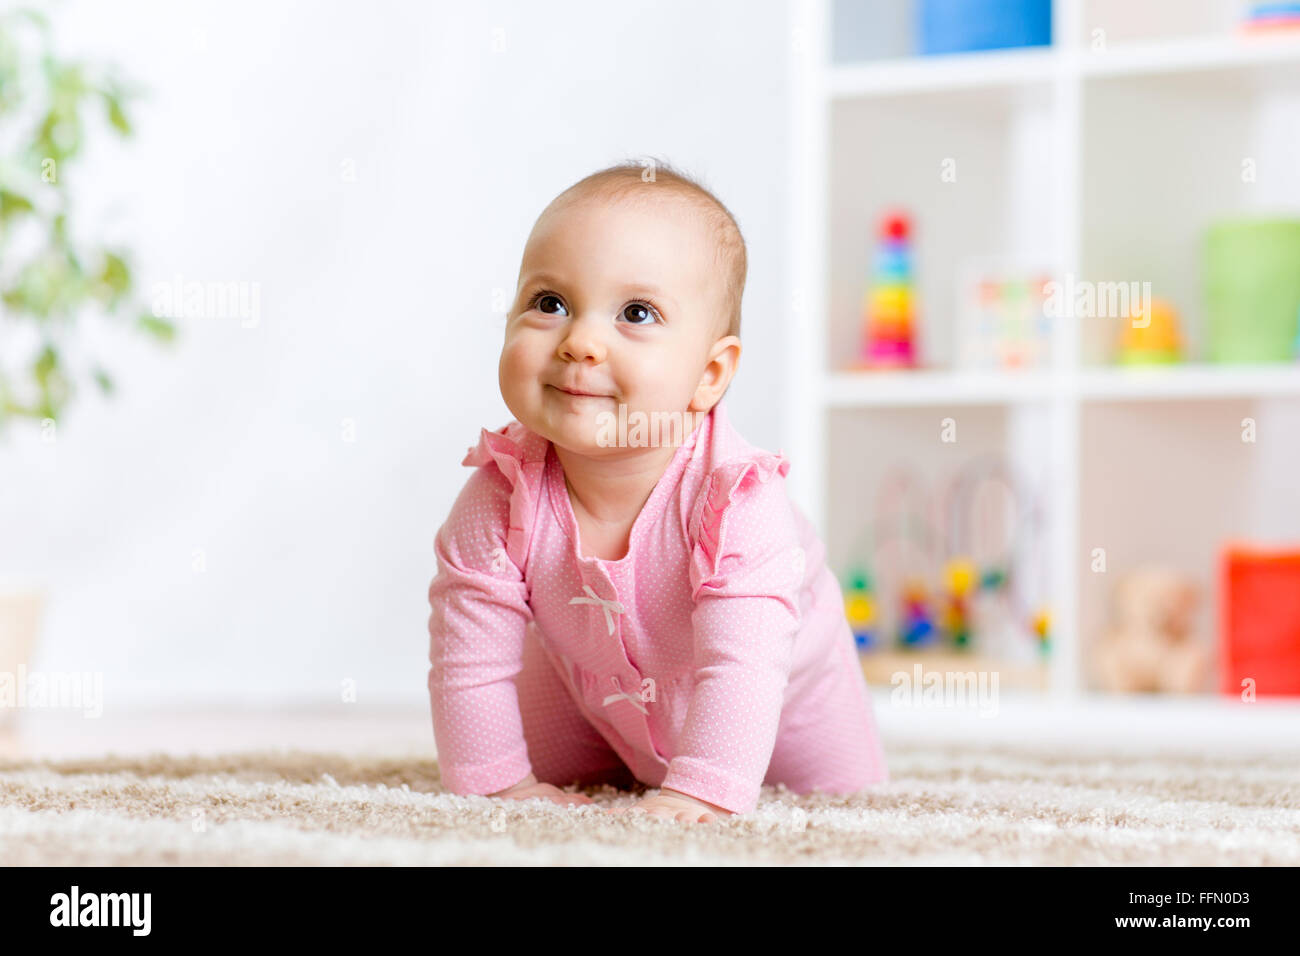 crawling funny baby indoors at home Stock Photo